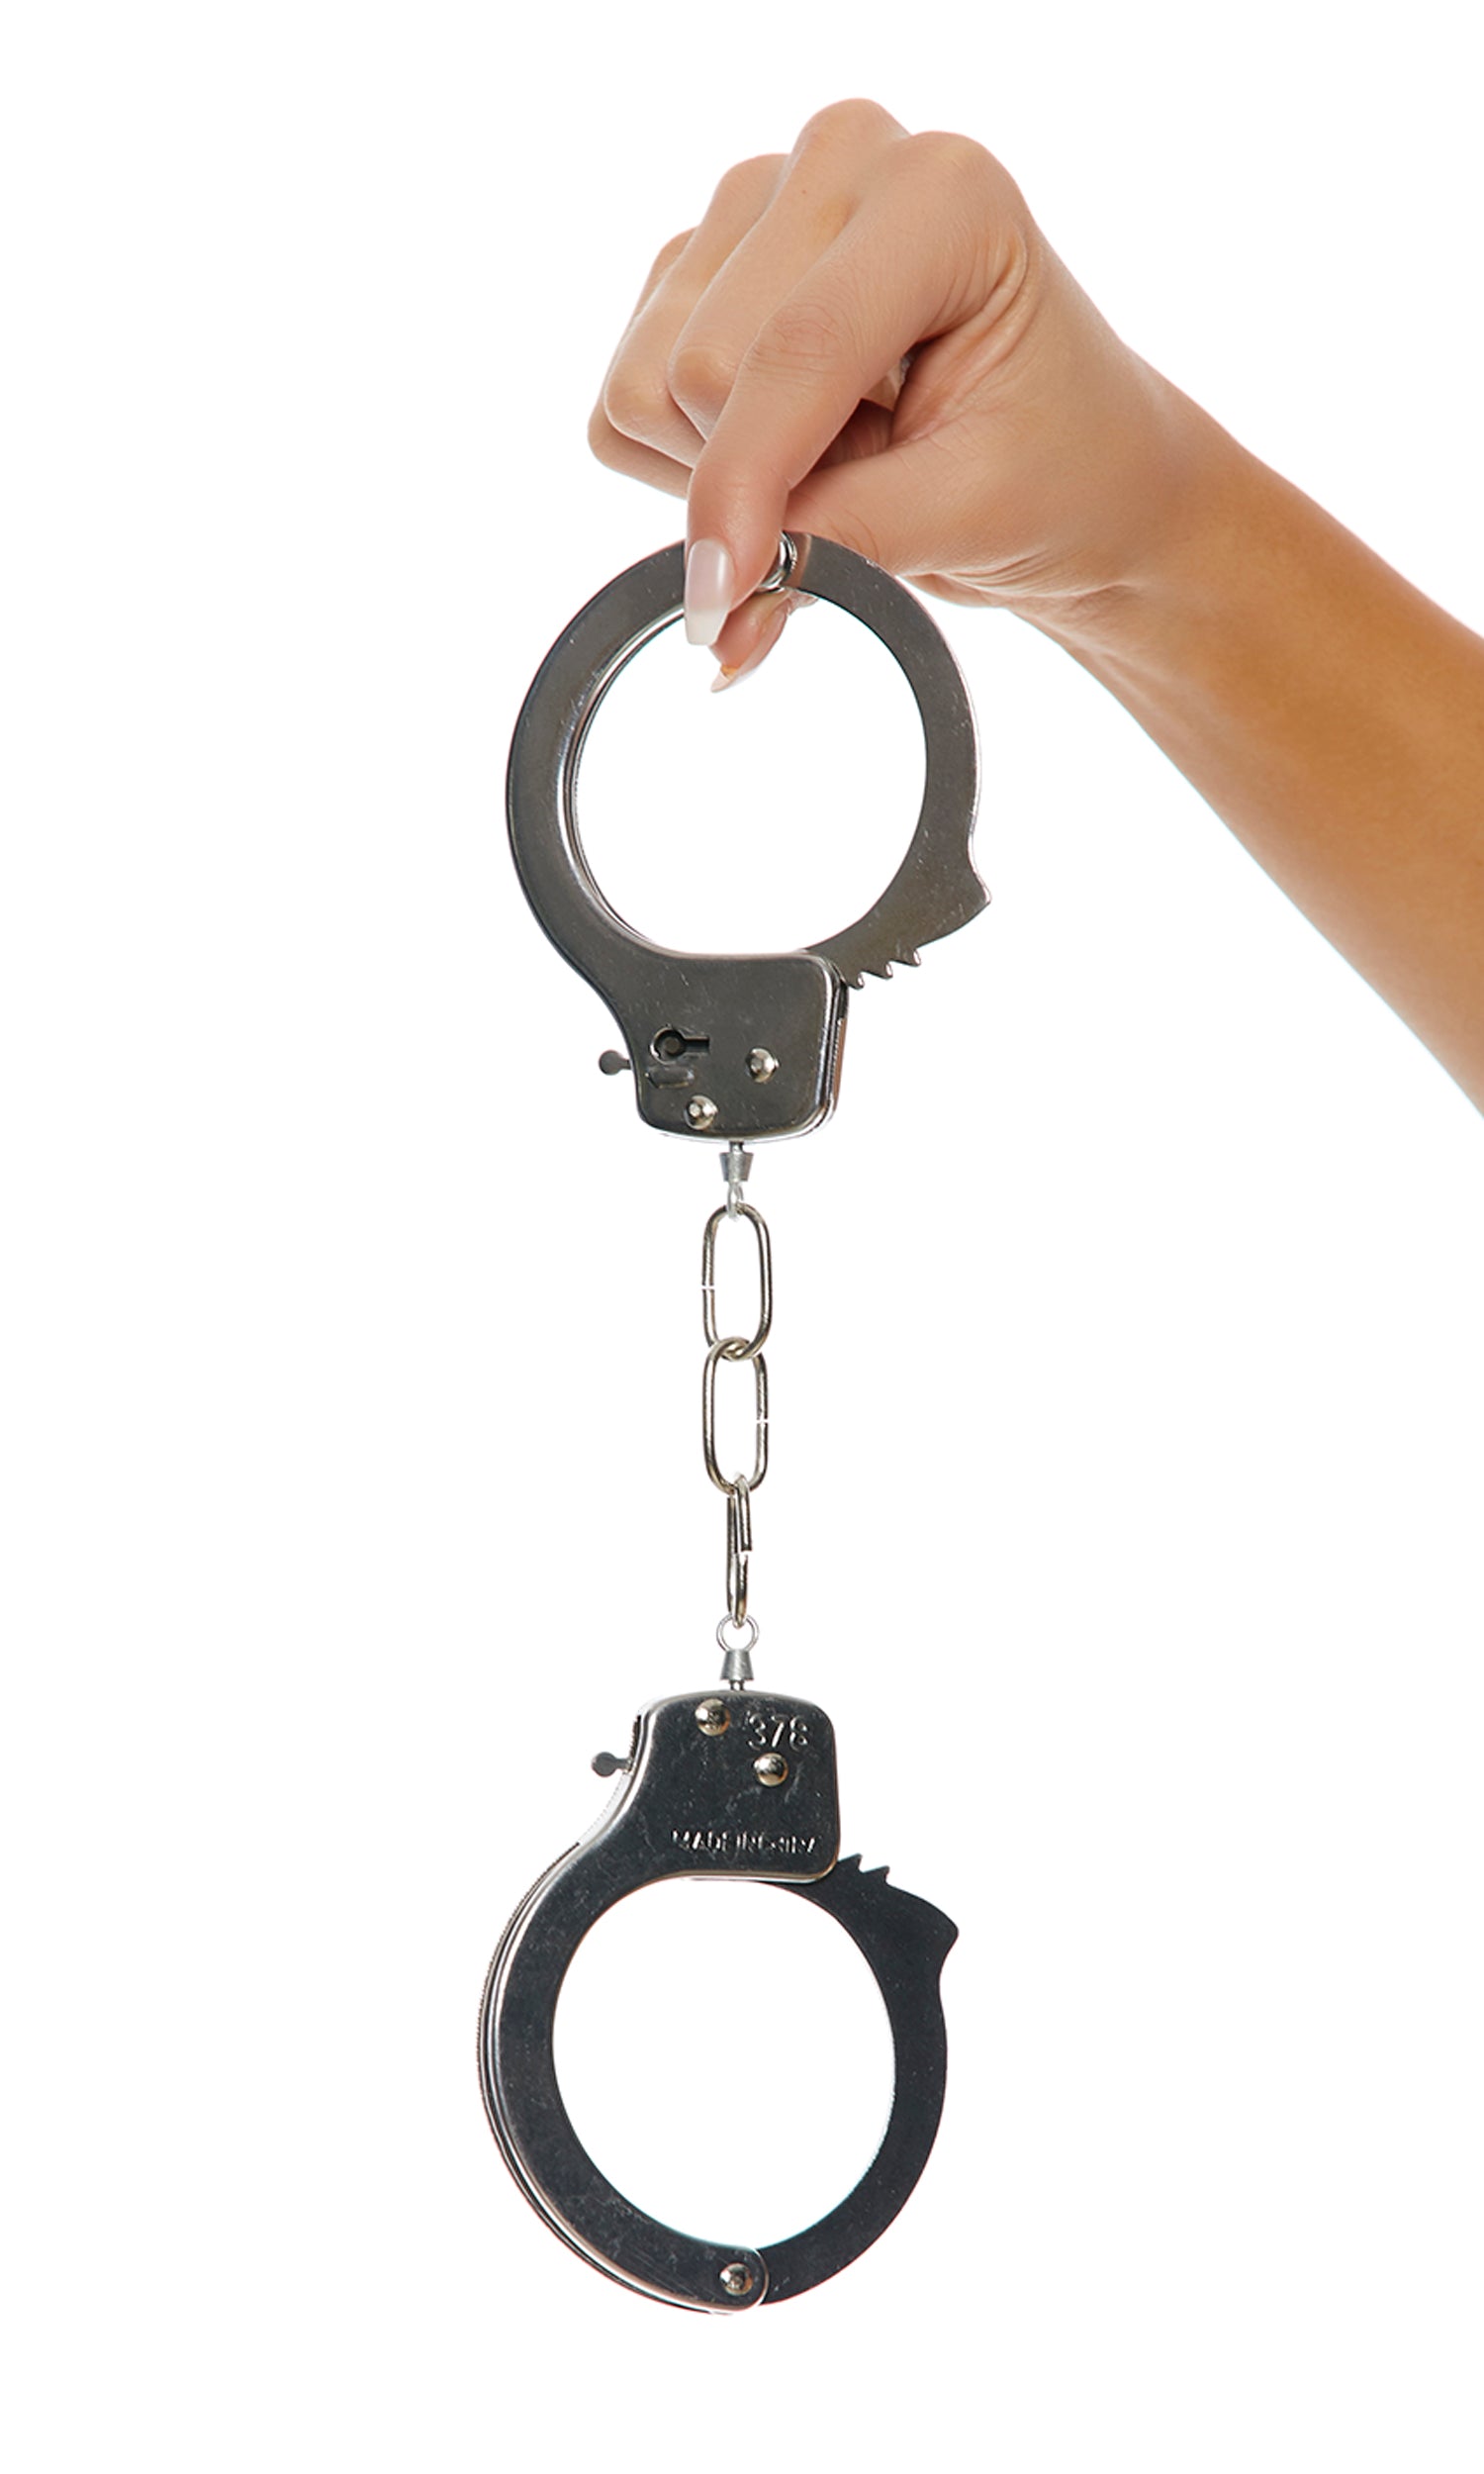 Costume Metal Handcuffs by Forplay Costumes only at  Tdcostumes.com